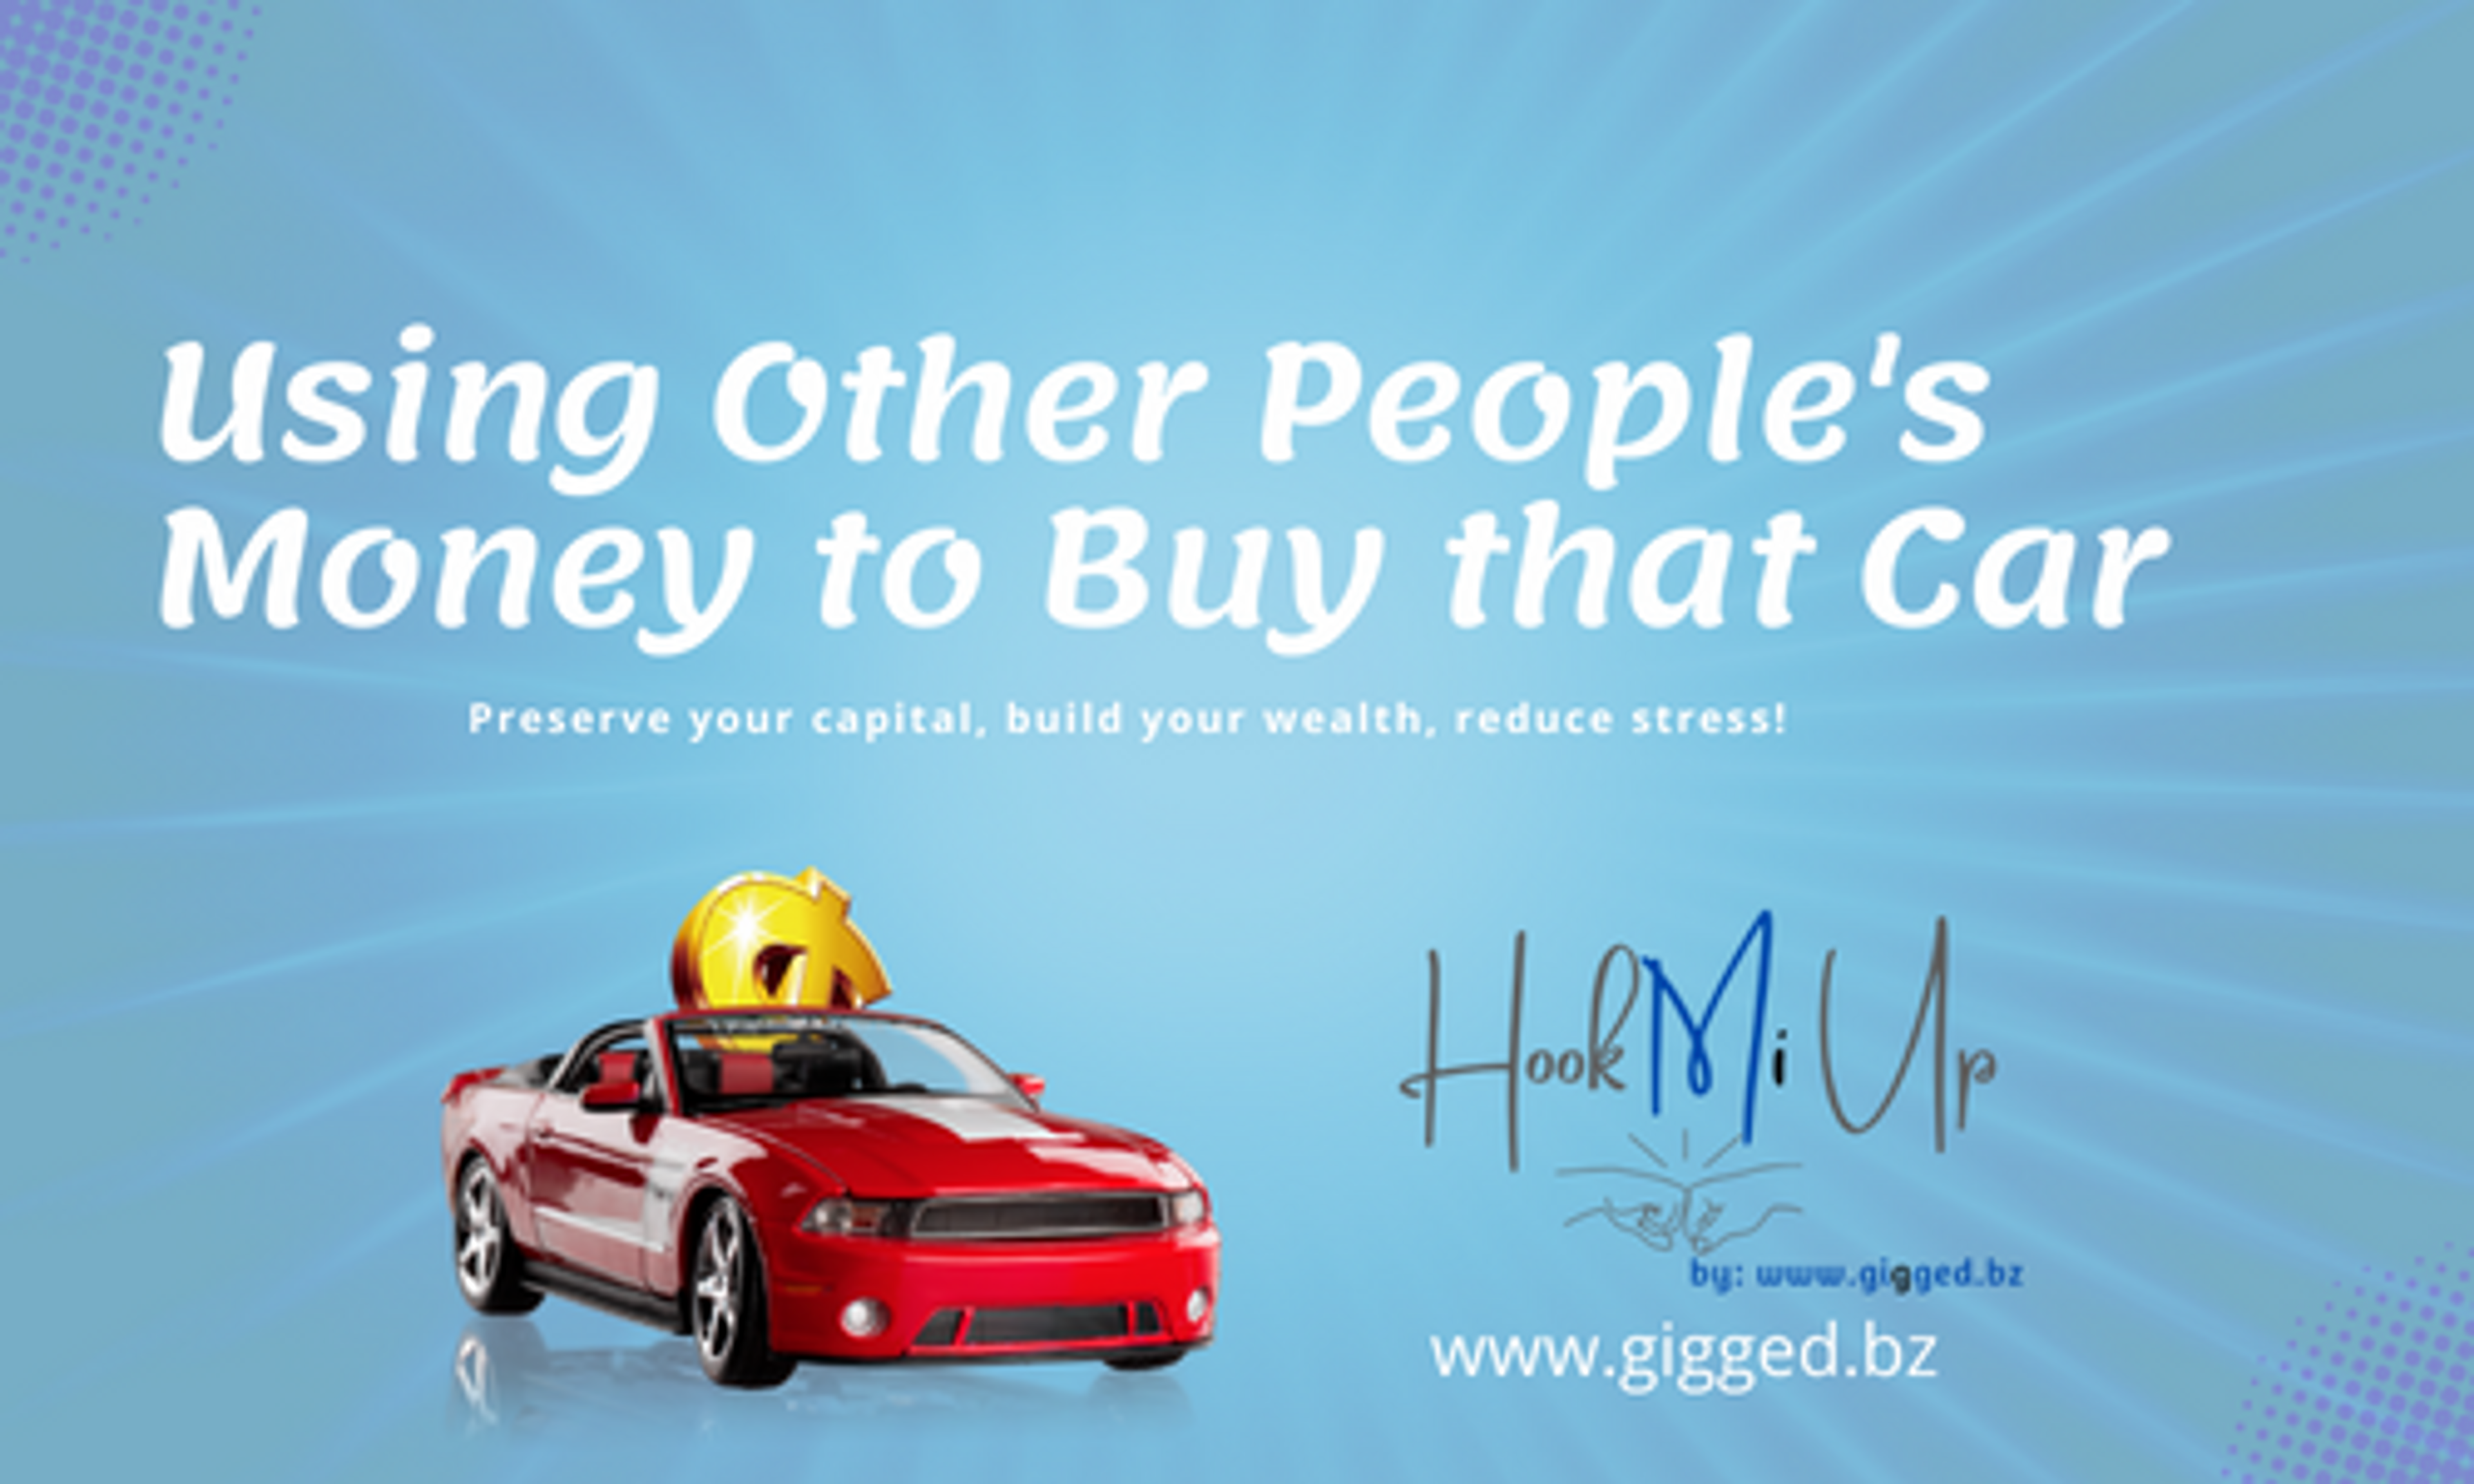 use other people's money to buy a car